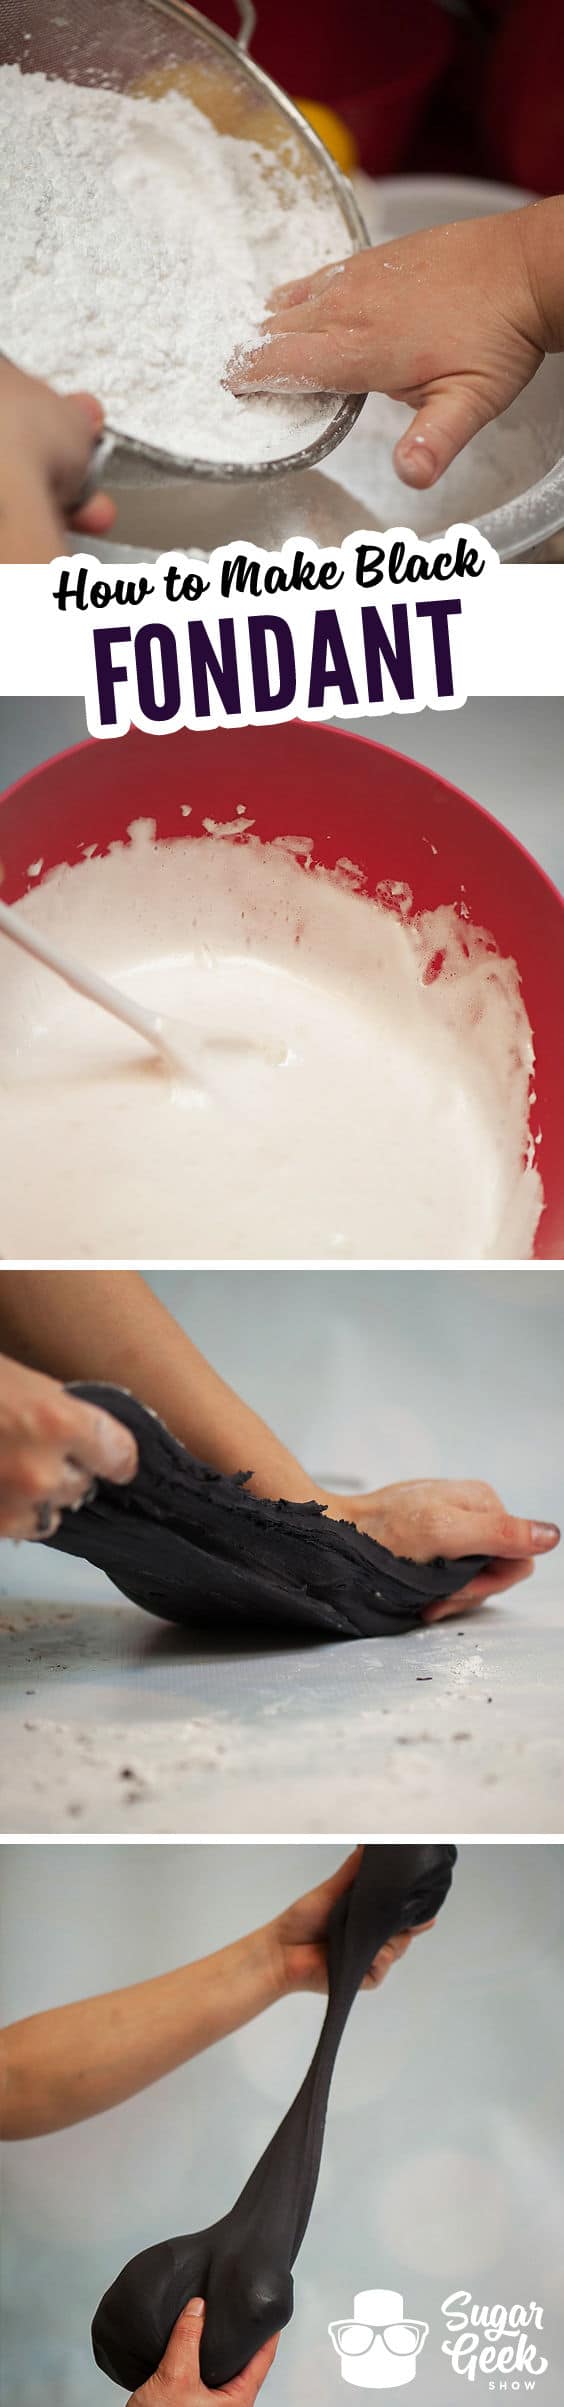 how to make black fondant with store-bought fondant and marshmallows recipe